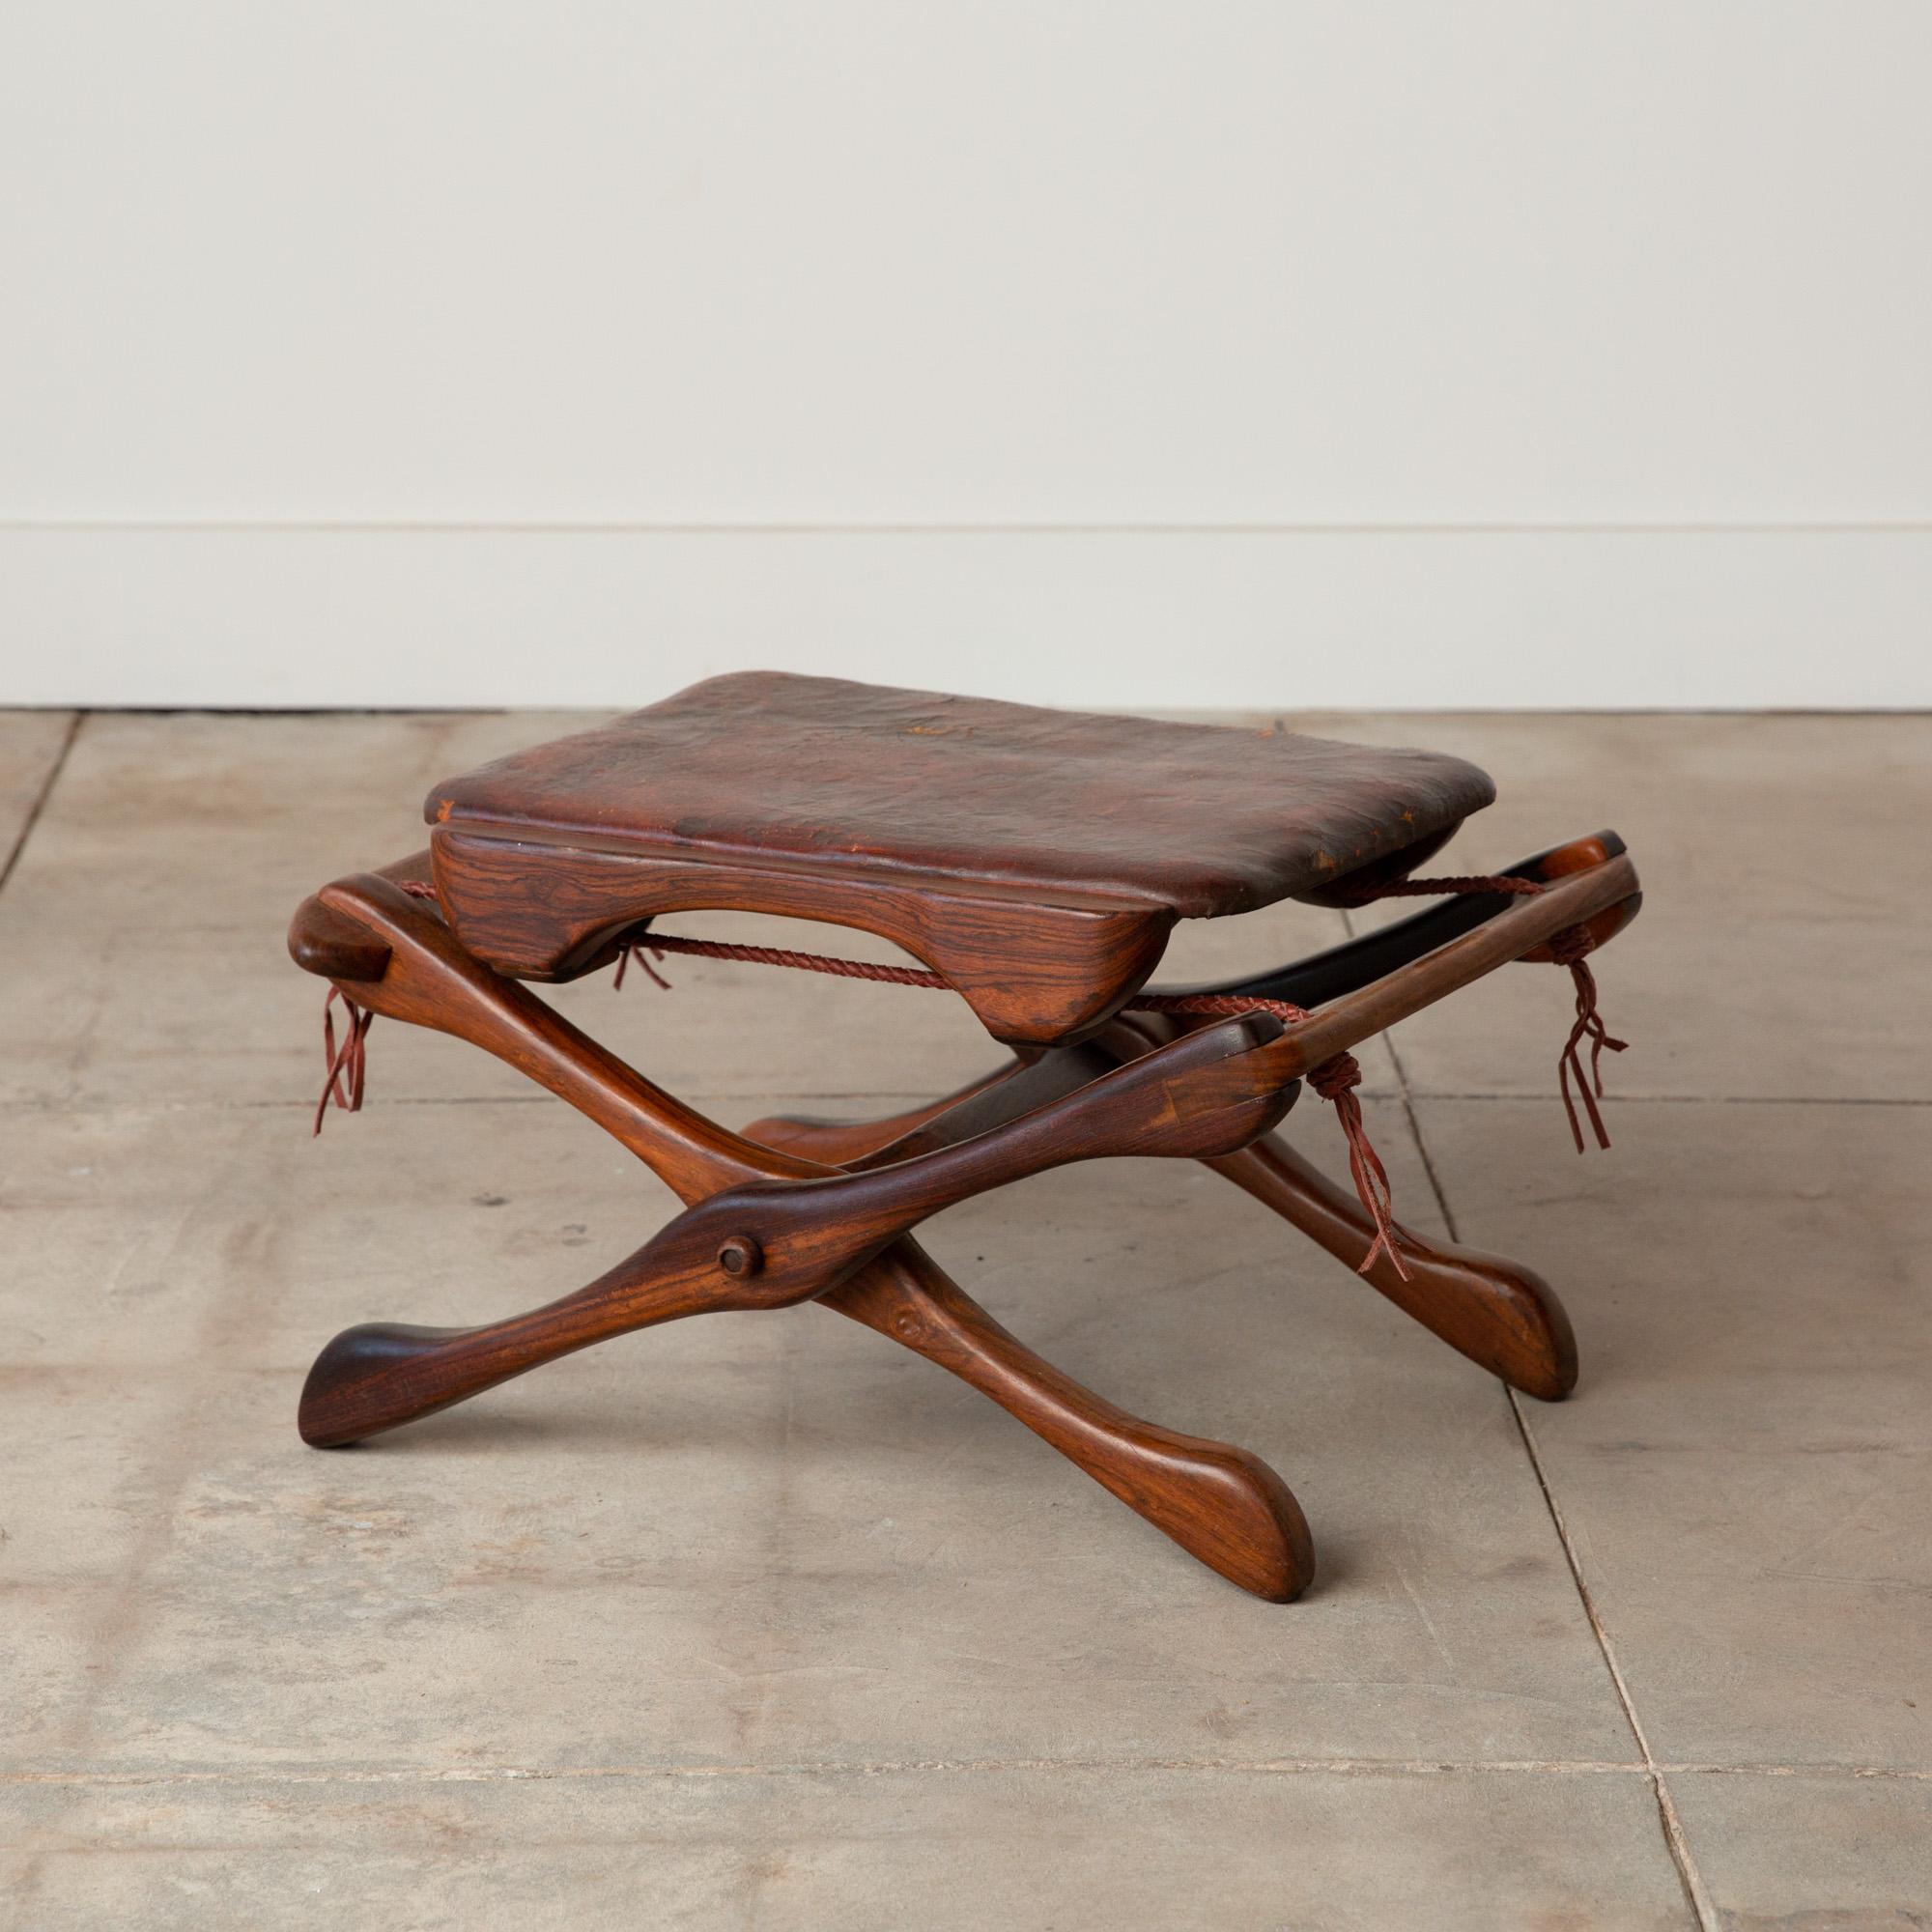 Leather folding stool by Don Shoemaker for Señal, Mexico, c.1960s. The stool features a folding rosewood frame and a removable seat with the original patinated leather upholstery and new leather support braiding.

Dimensions: 22